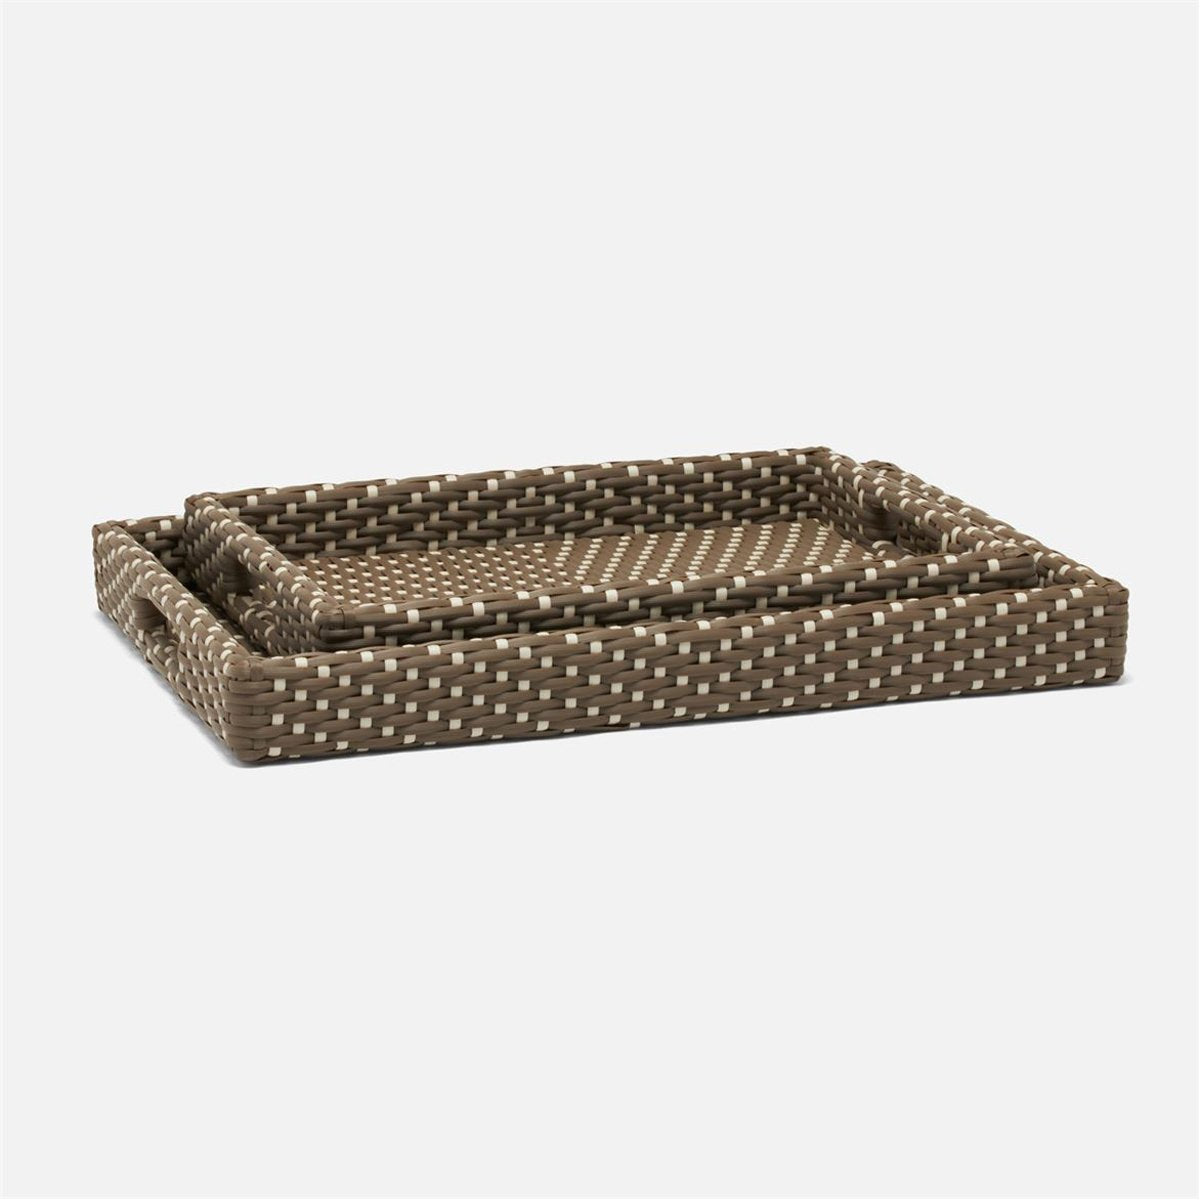 Made Goods Avanna High-Contrast Faux Wicker Outdoor Tray, 2-Piece Set